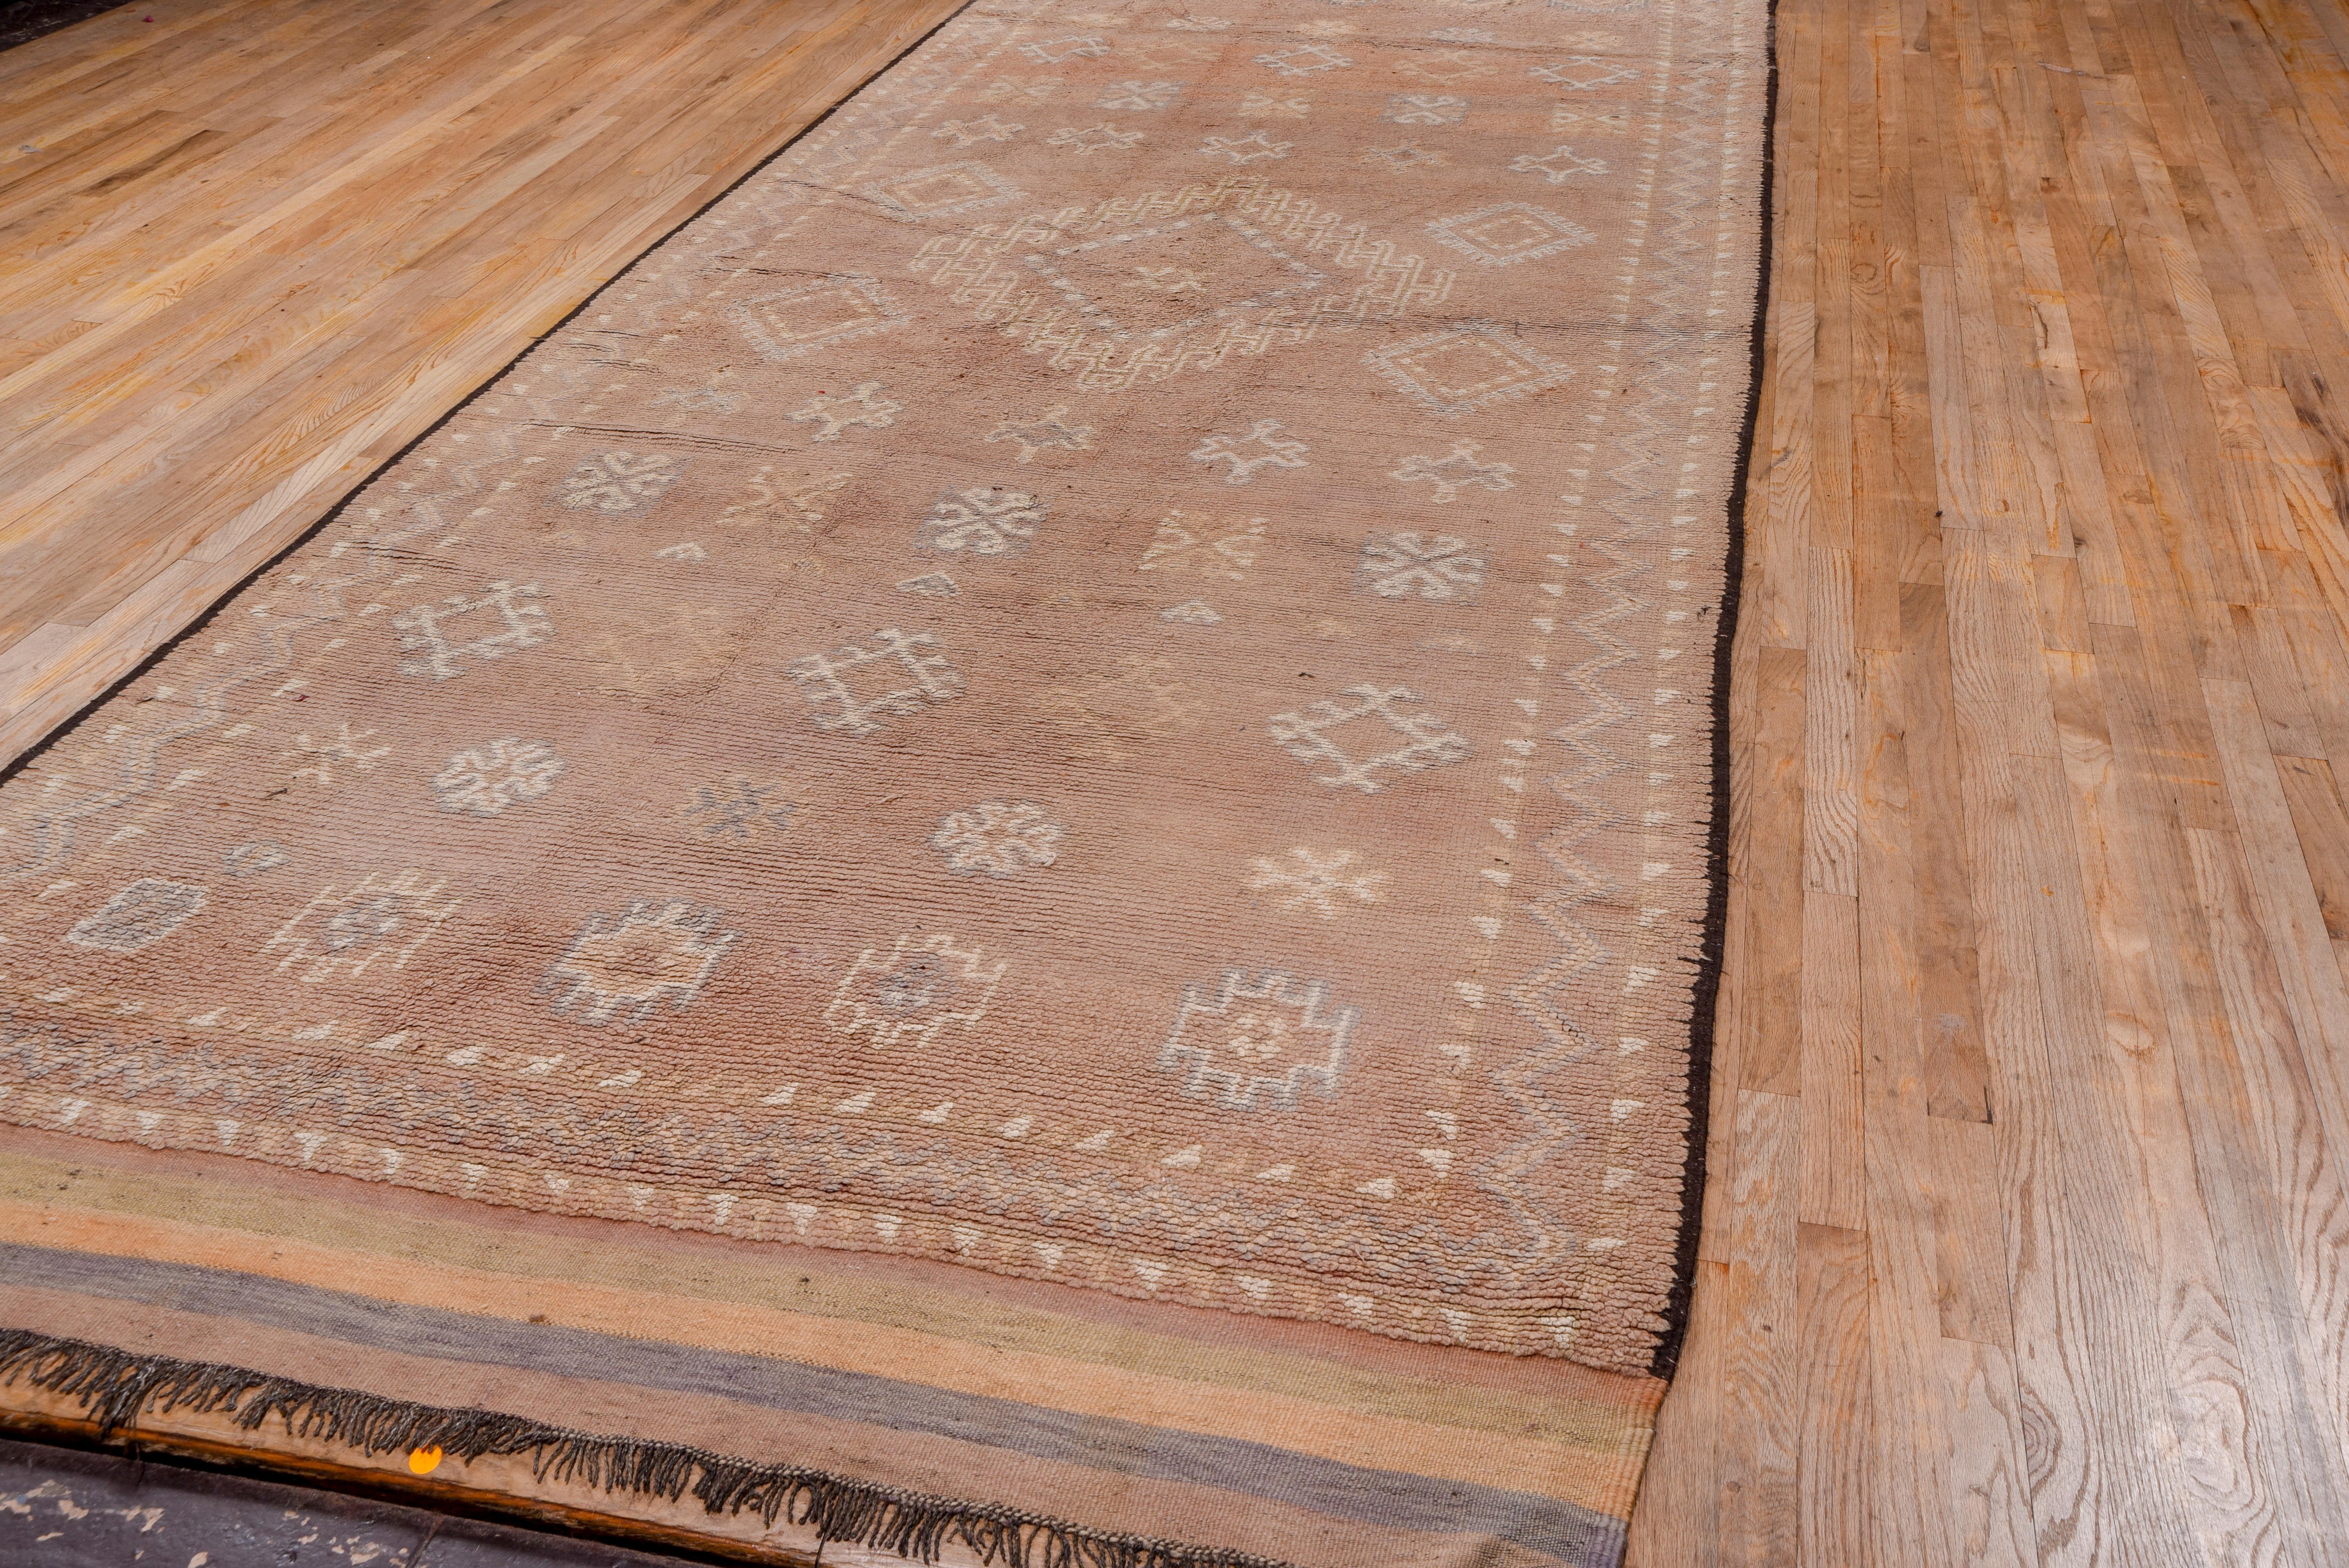 This high pile, coarsely woven tribal carpet displays a very soft coral field presenting a large central diamond medallion with a connected and hooked H surround, with five rows both above and below of five stars each. Ivory details. Narrow coral